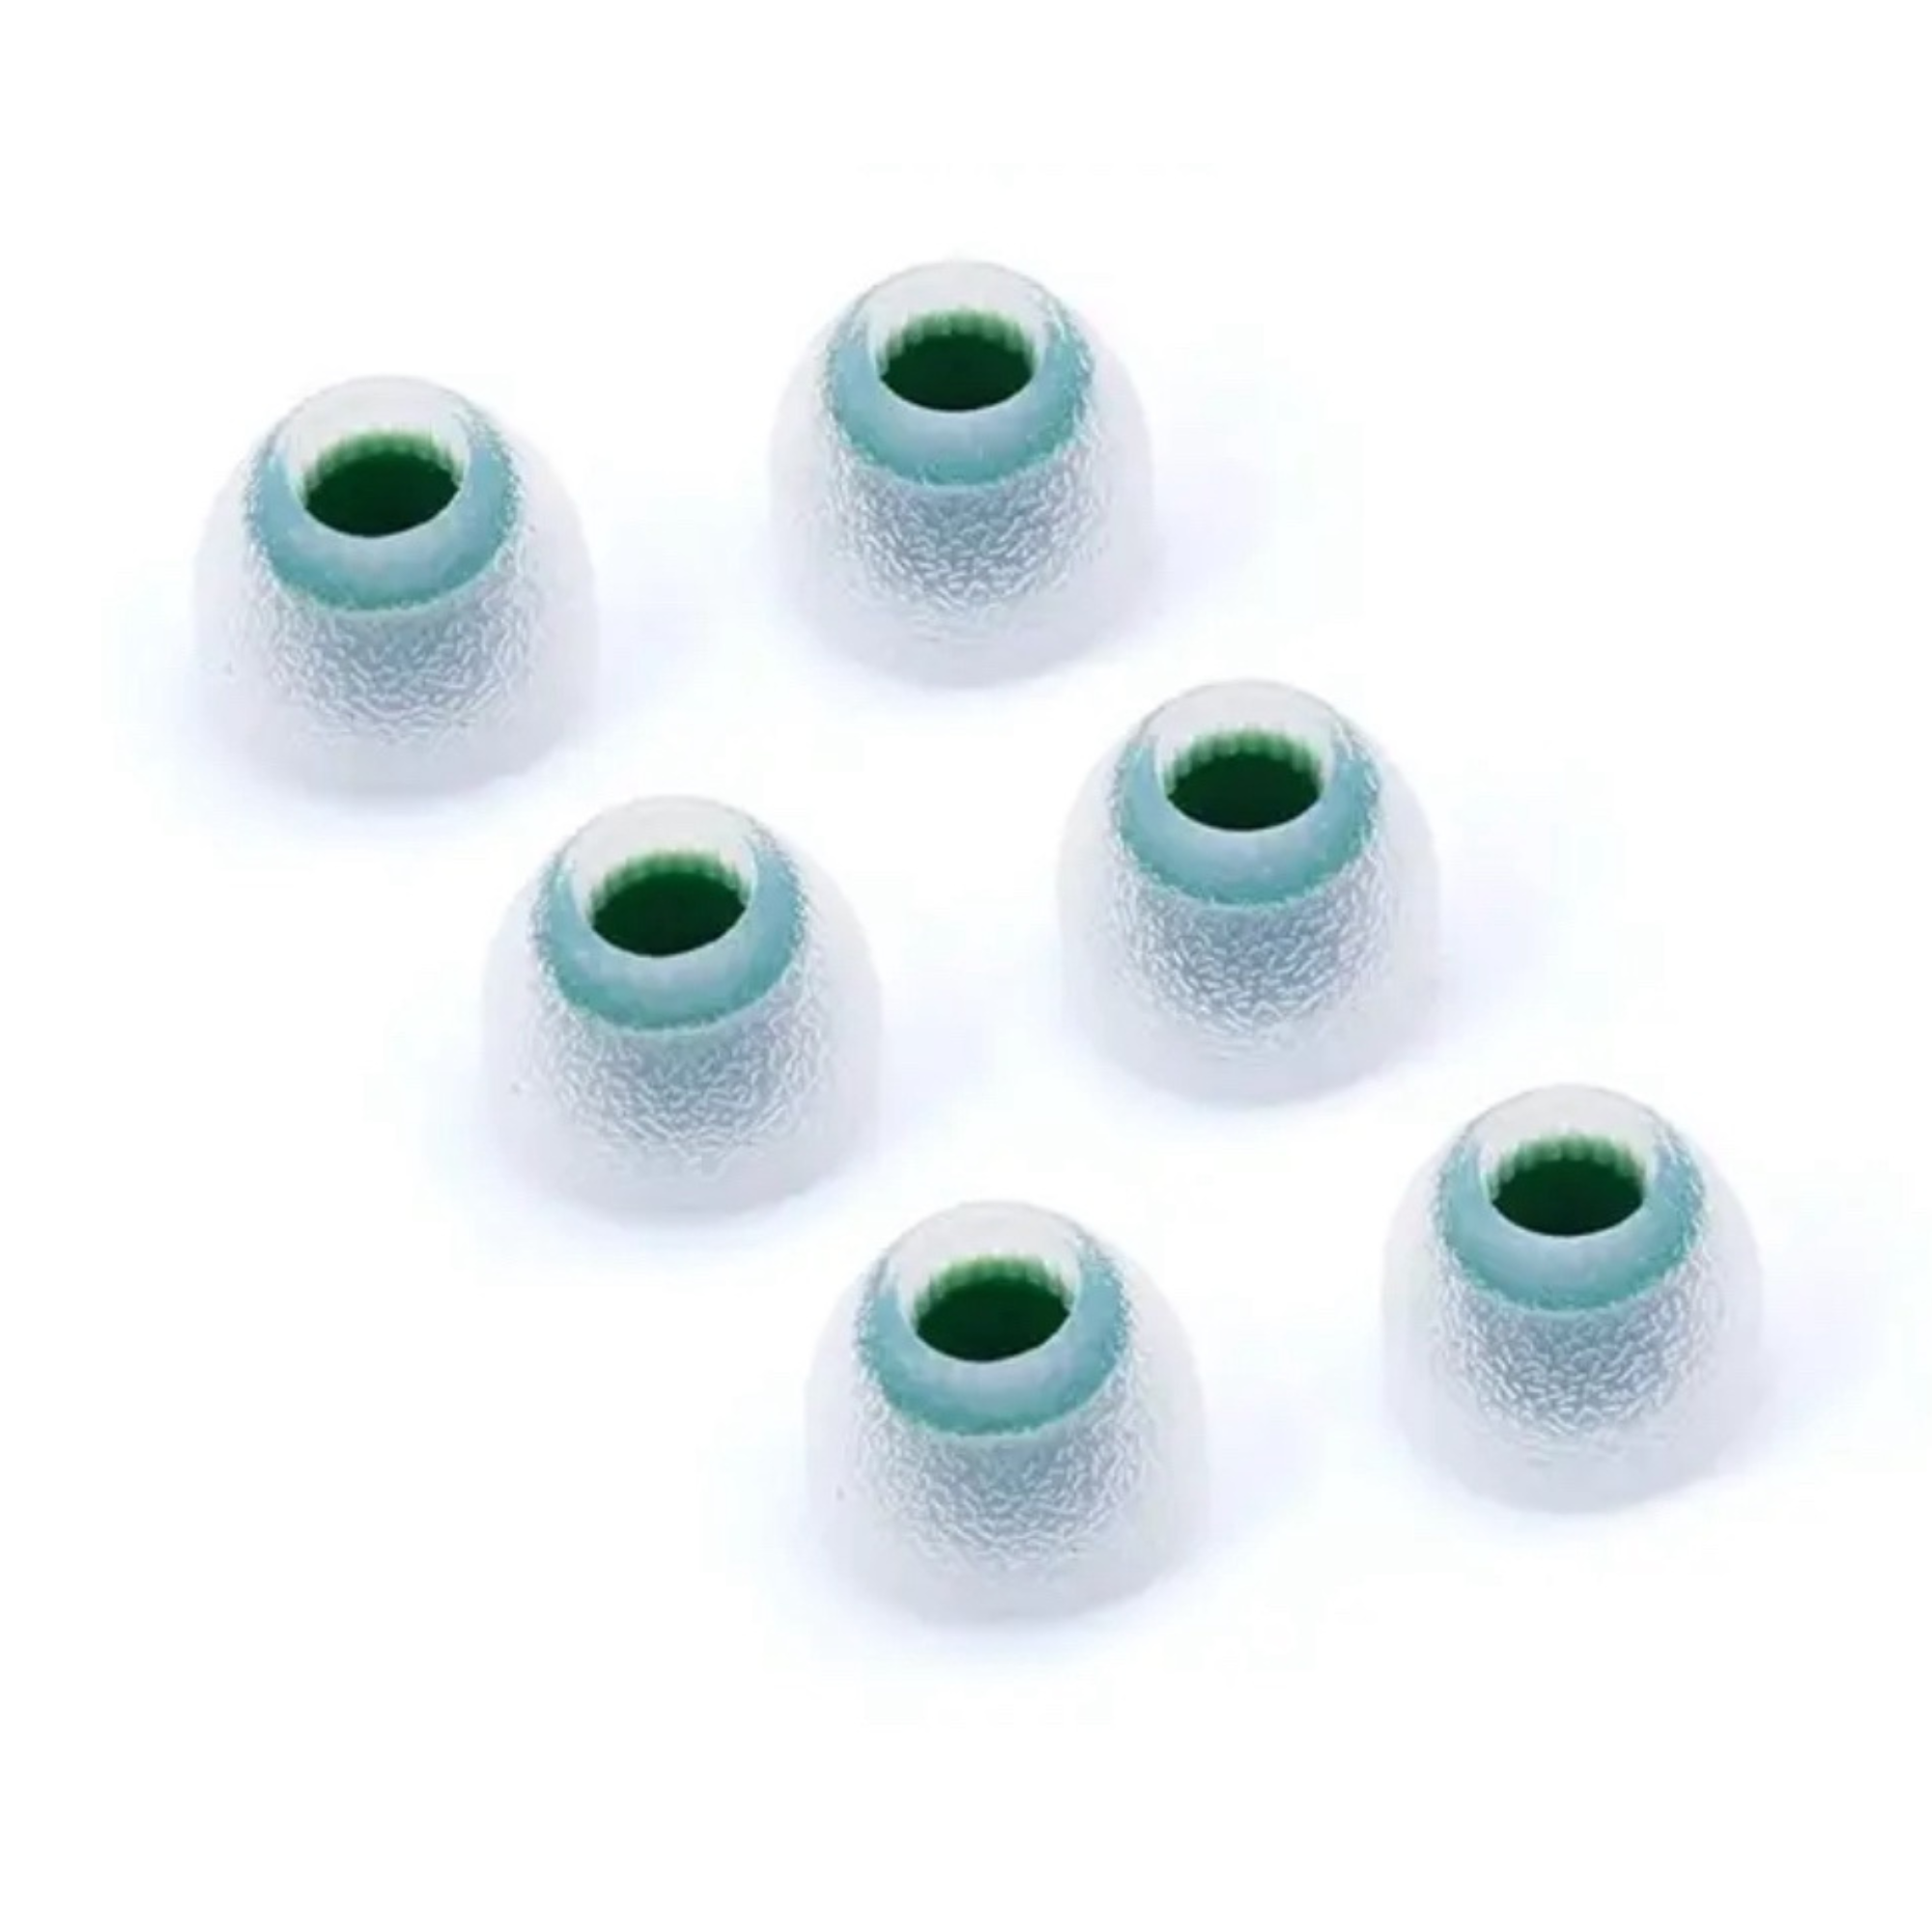 Six turquoise silicone IEM tips.